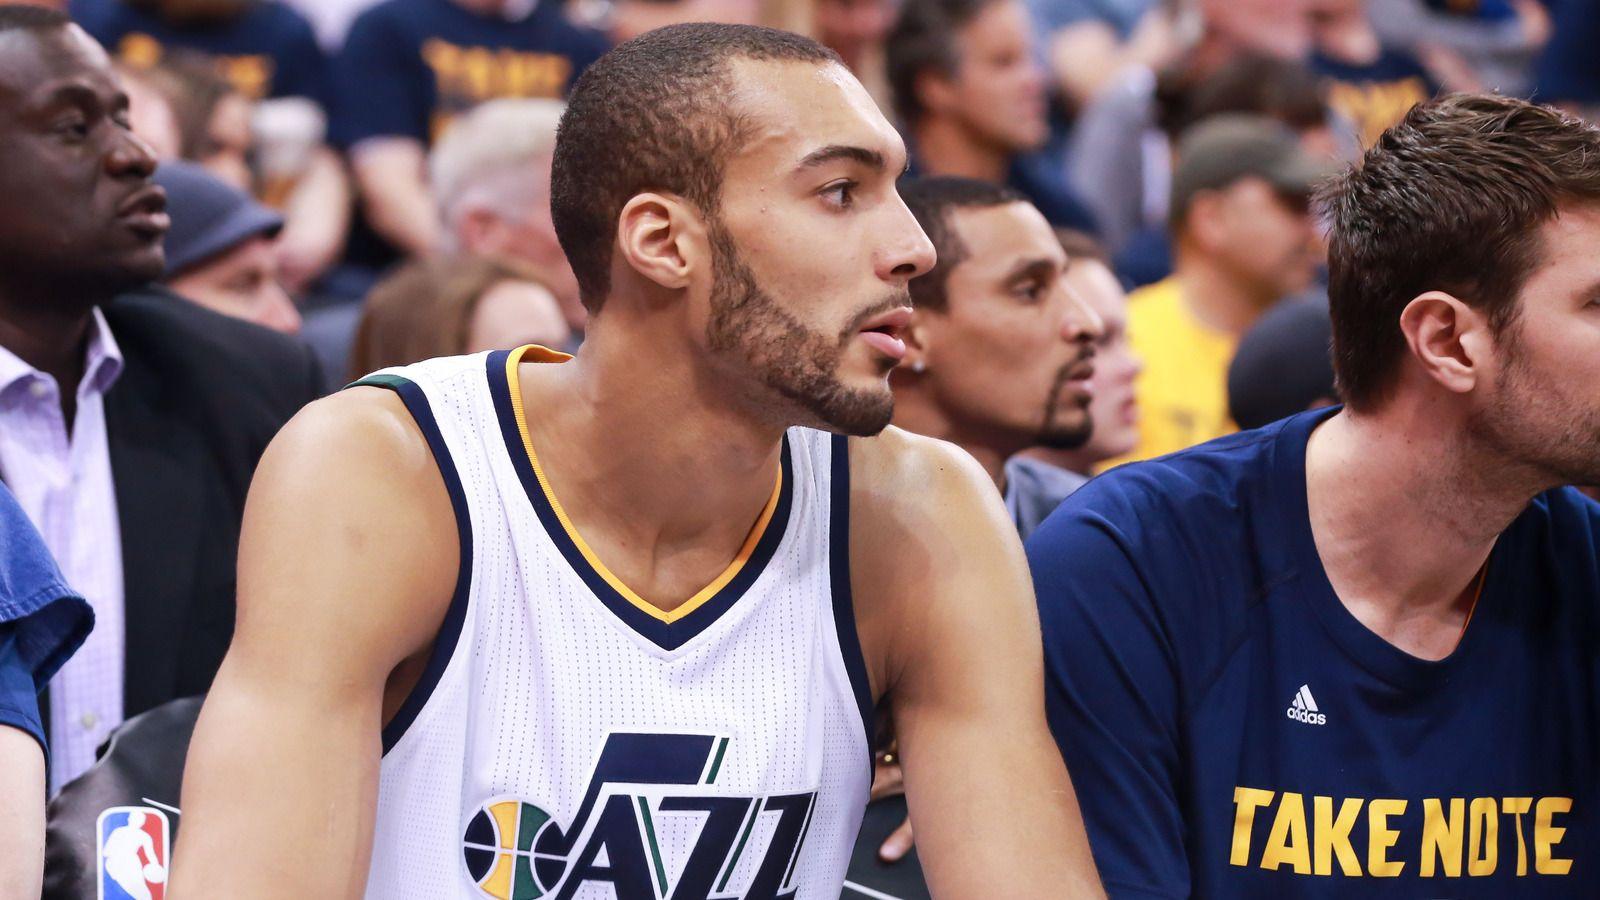 Rudy Gobert responds to fan's tweet about issue with Ricky Rubio